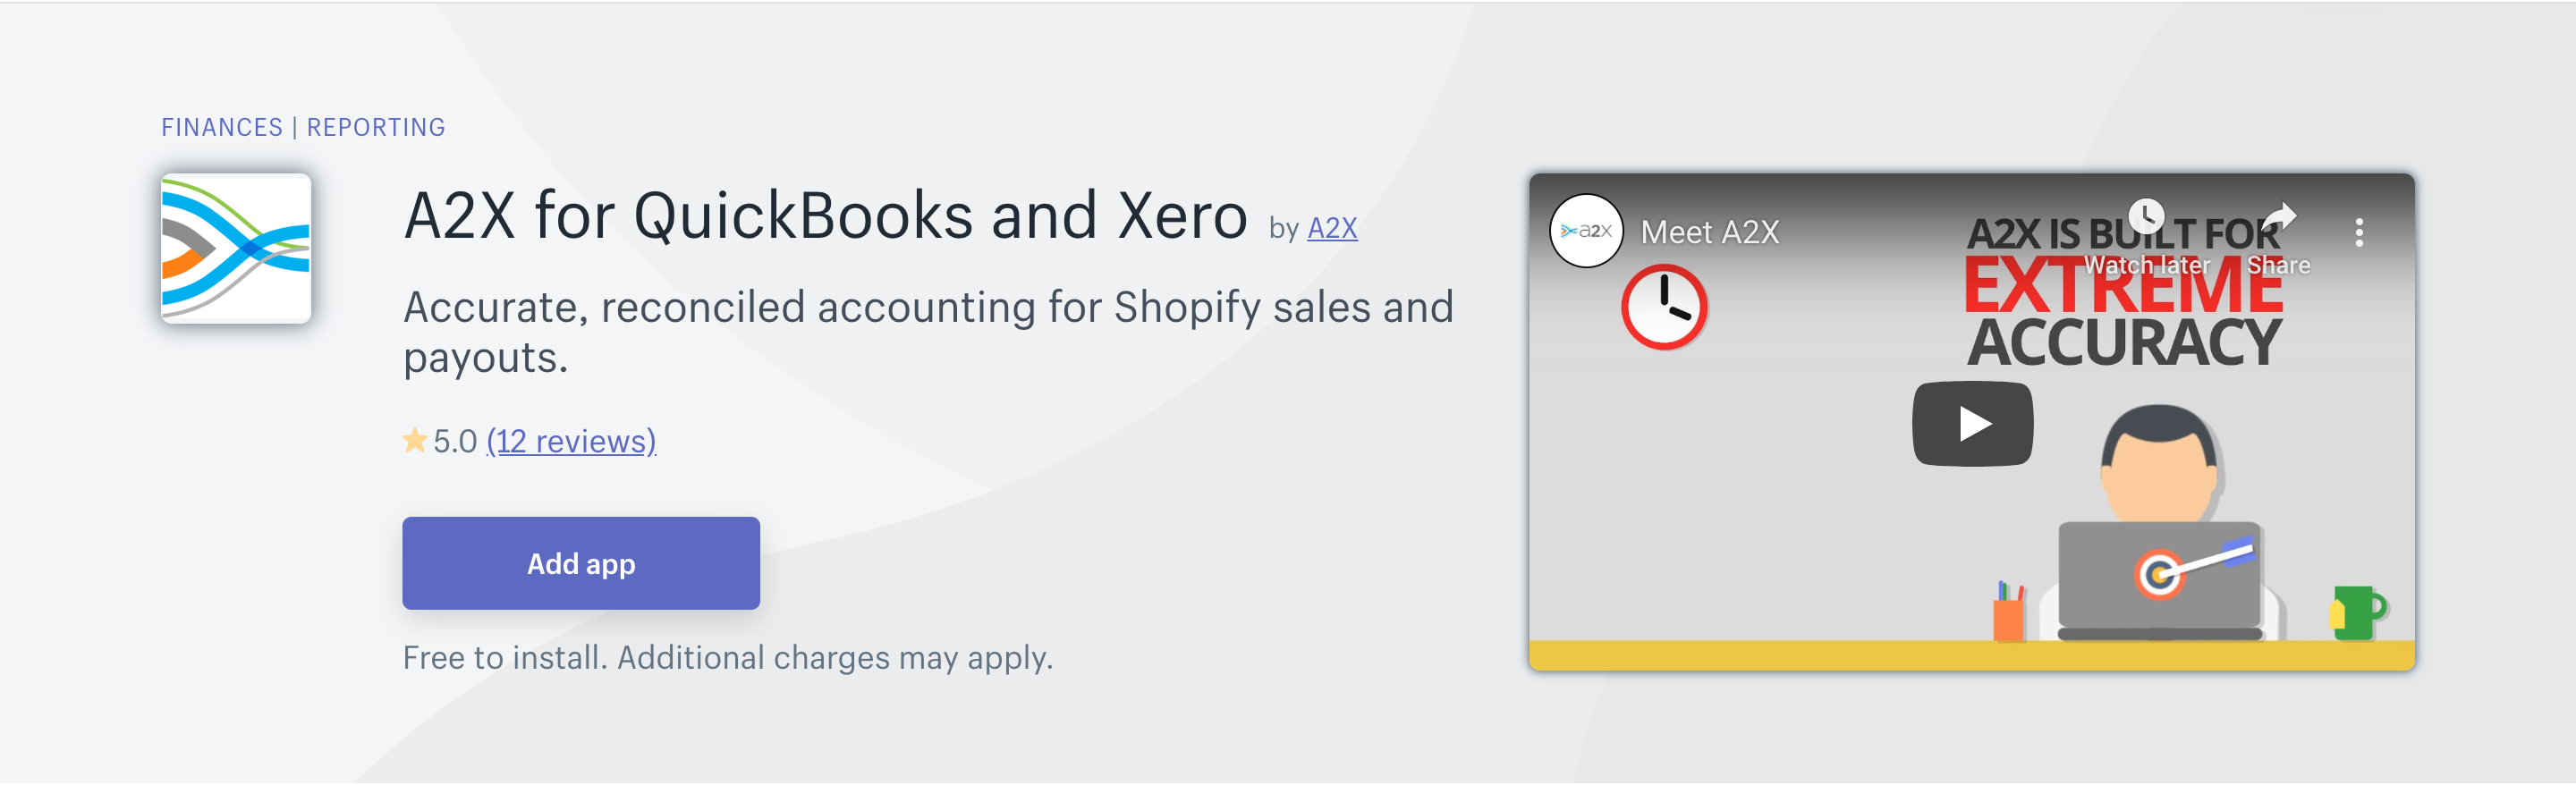 Apps to Integrate Quickbooks and Shopify: A2X for Quickbooks and Xero by A2X